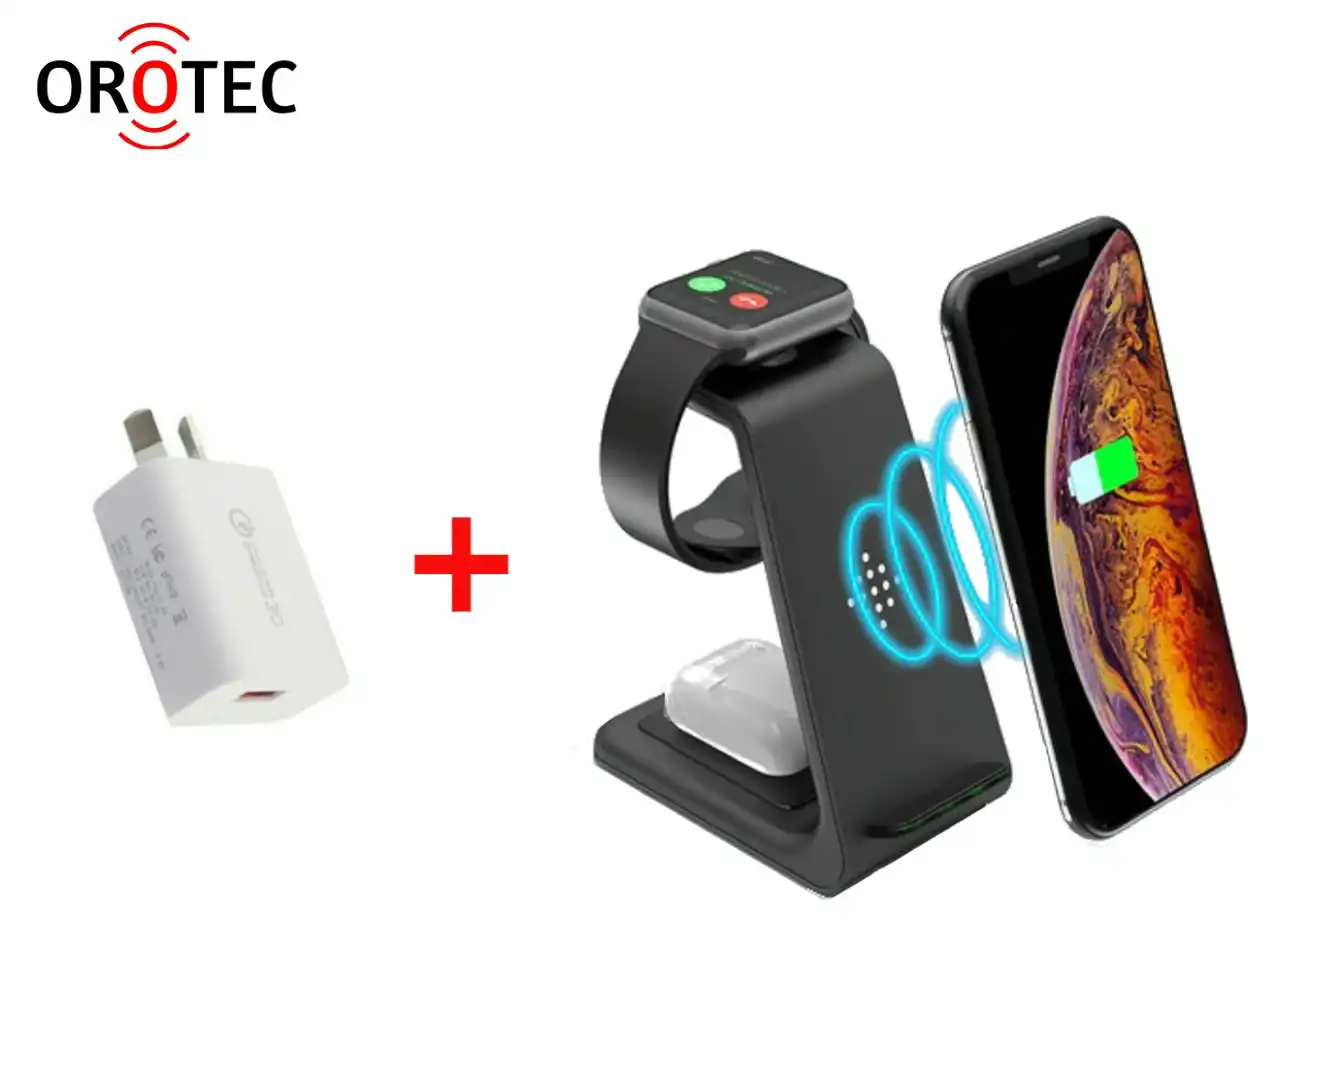 Orotec NuGen Apple 3-in-1 Triple Wireless Charger (Apple Watch/AirPods/Smartphone) Black with Qualcomm Charger